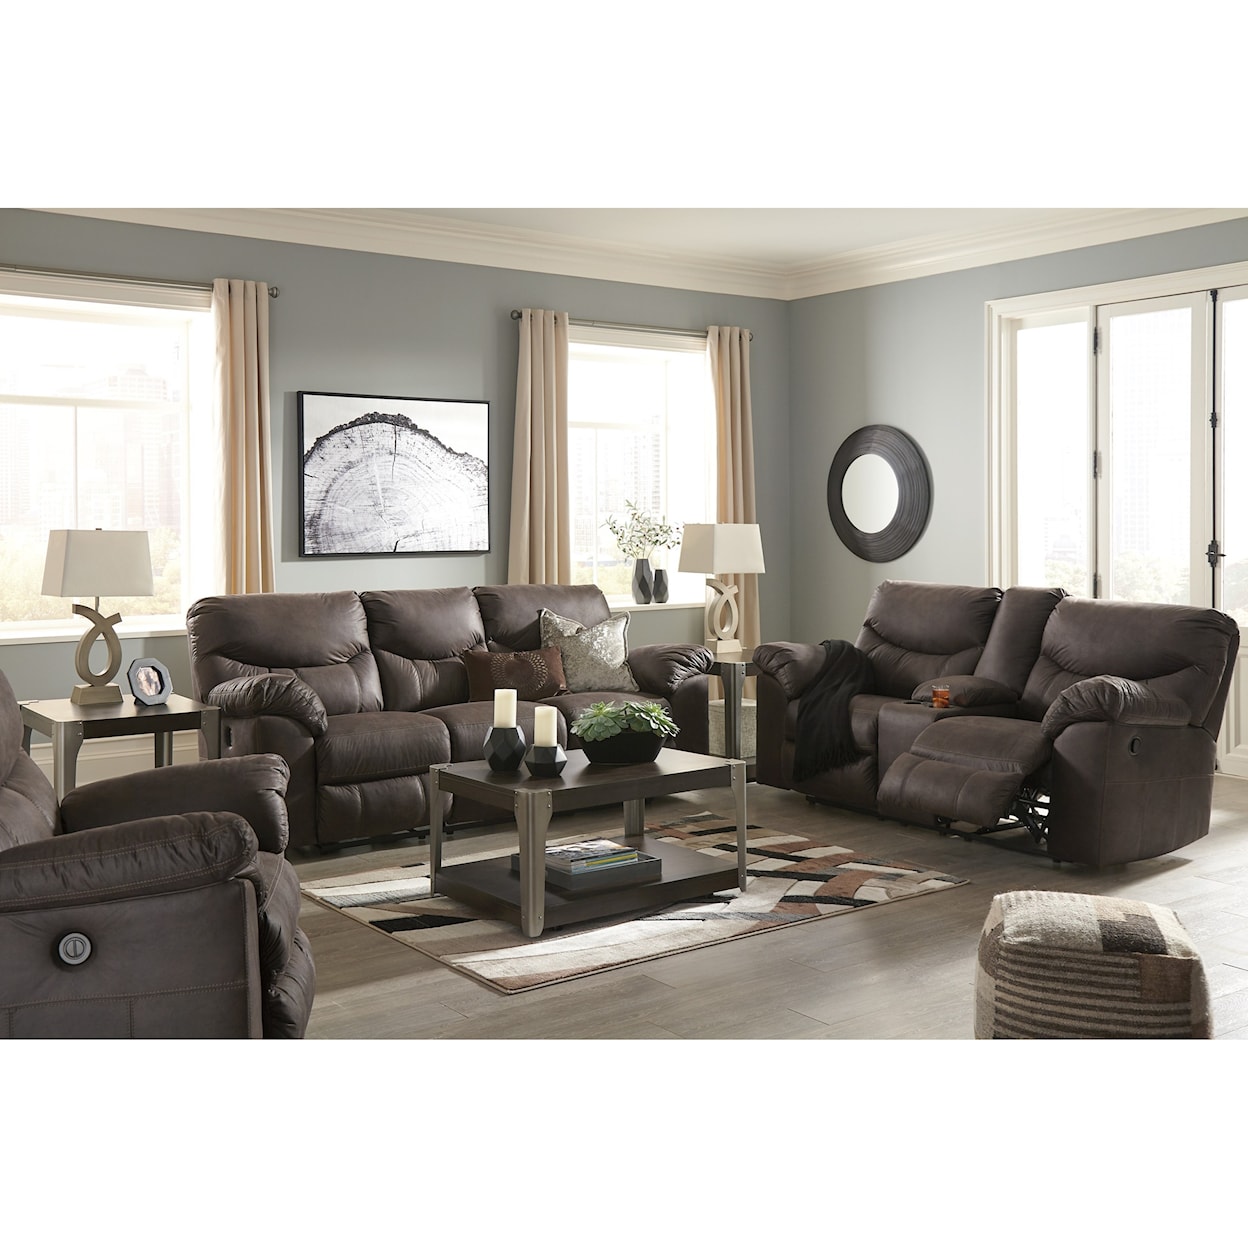 Signature Design by Ashley Boxberg Reclining Living Room Group